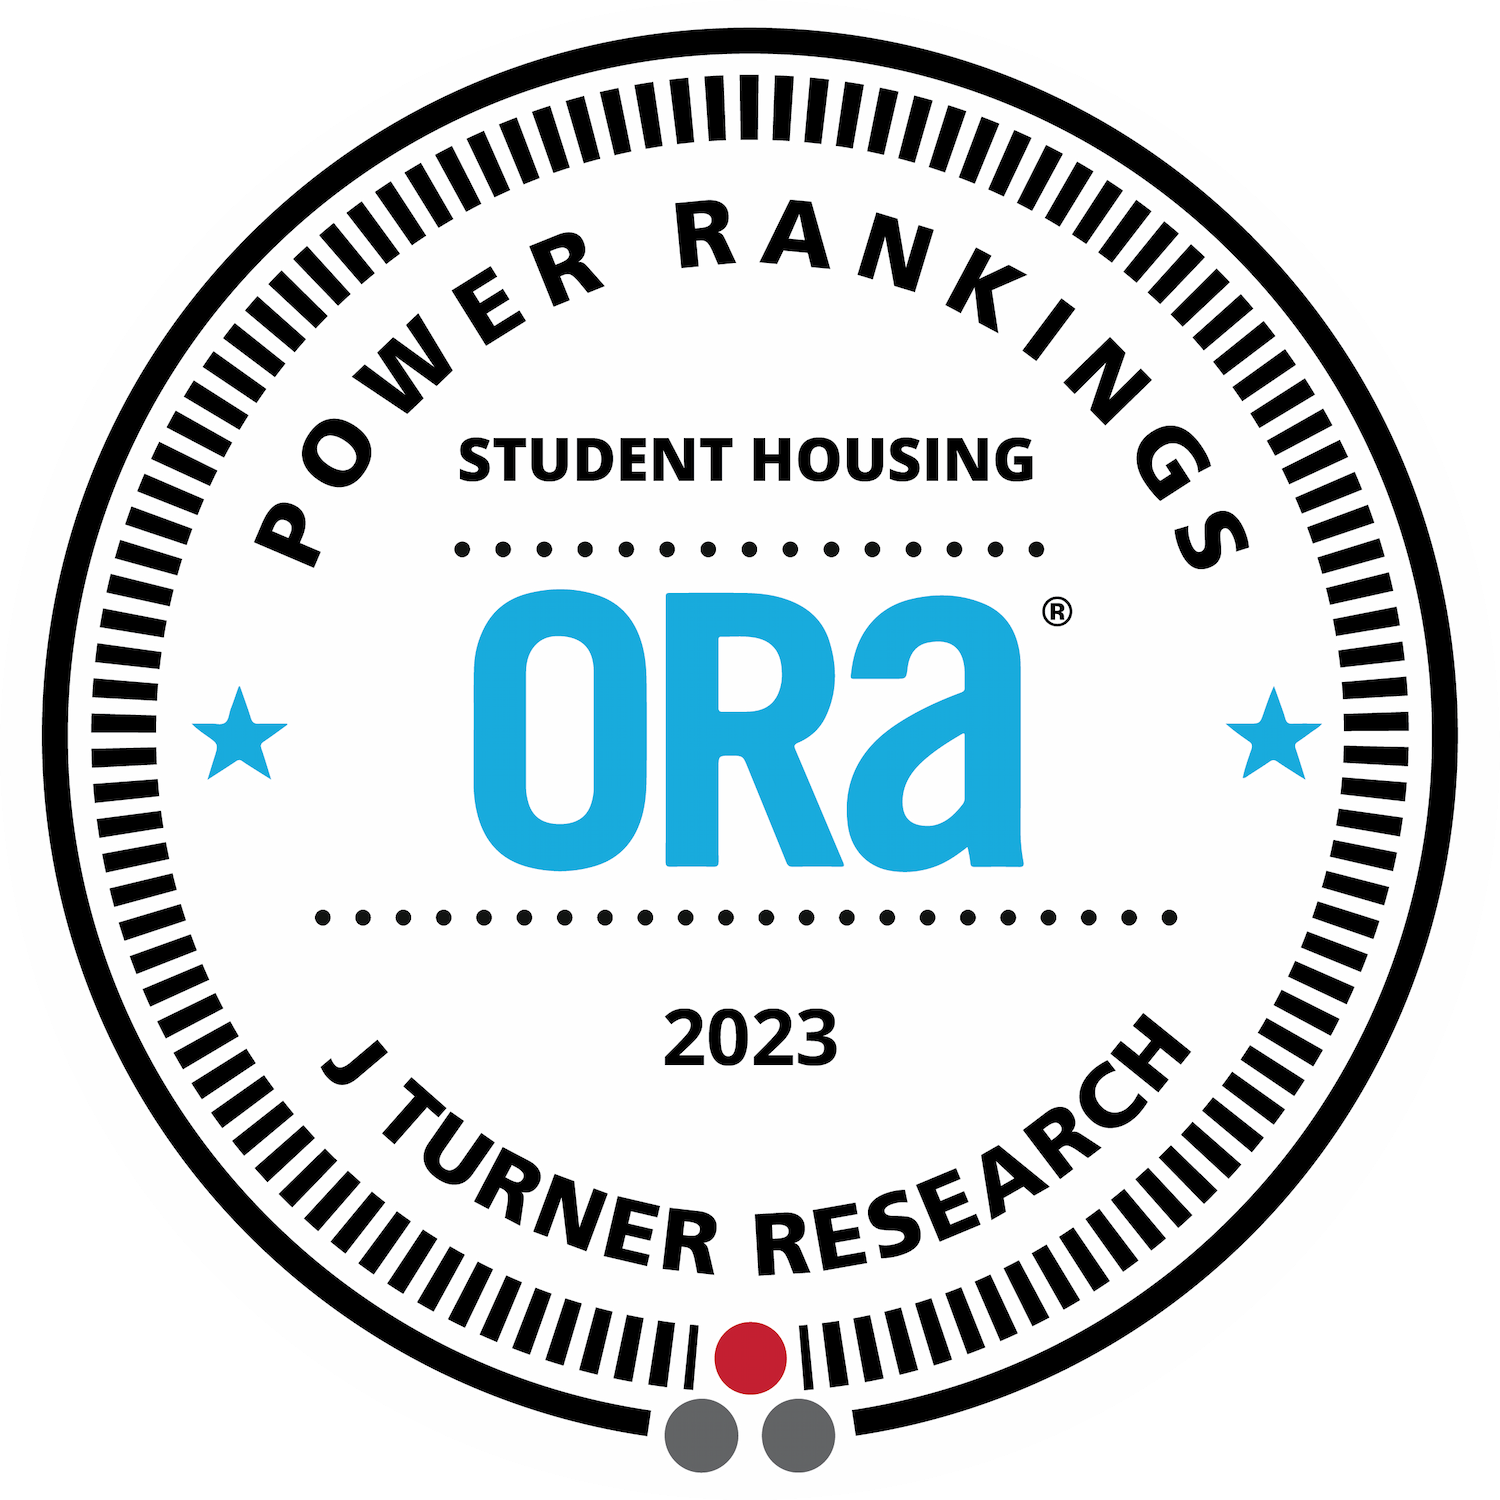 2023 website student housing ranking seal compressed (1)